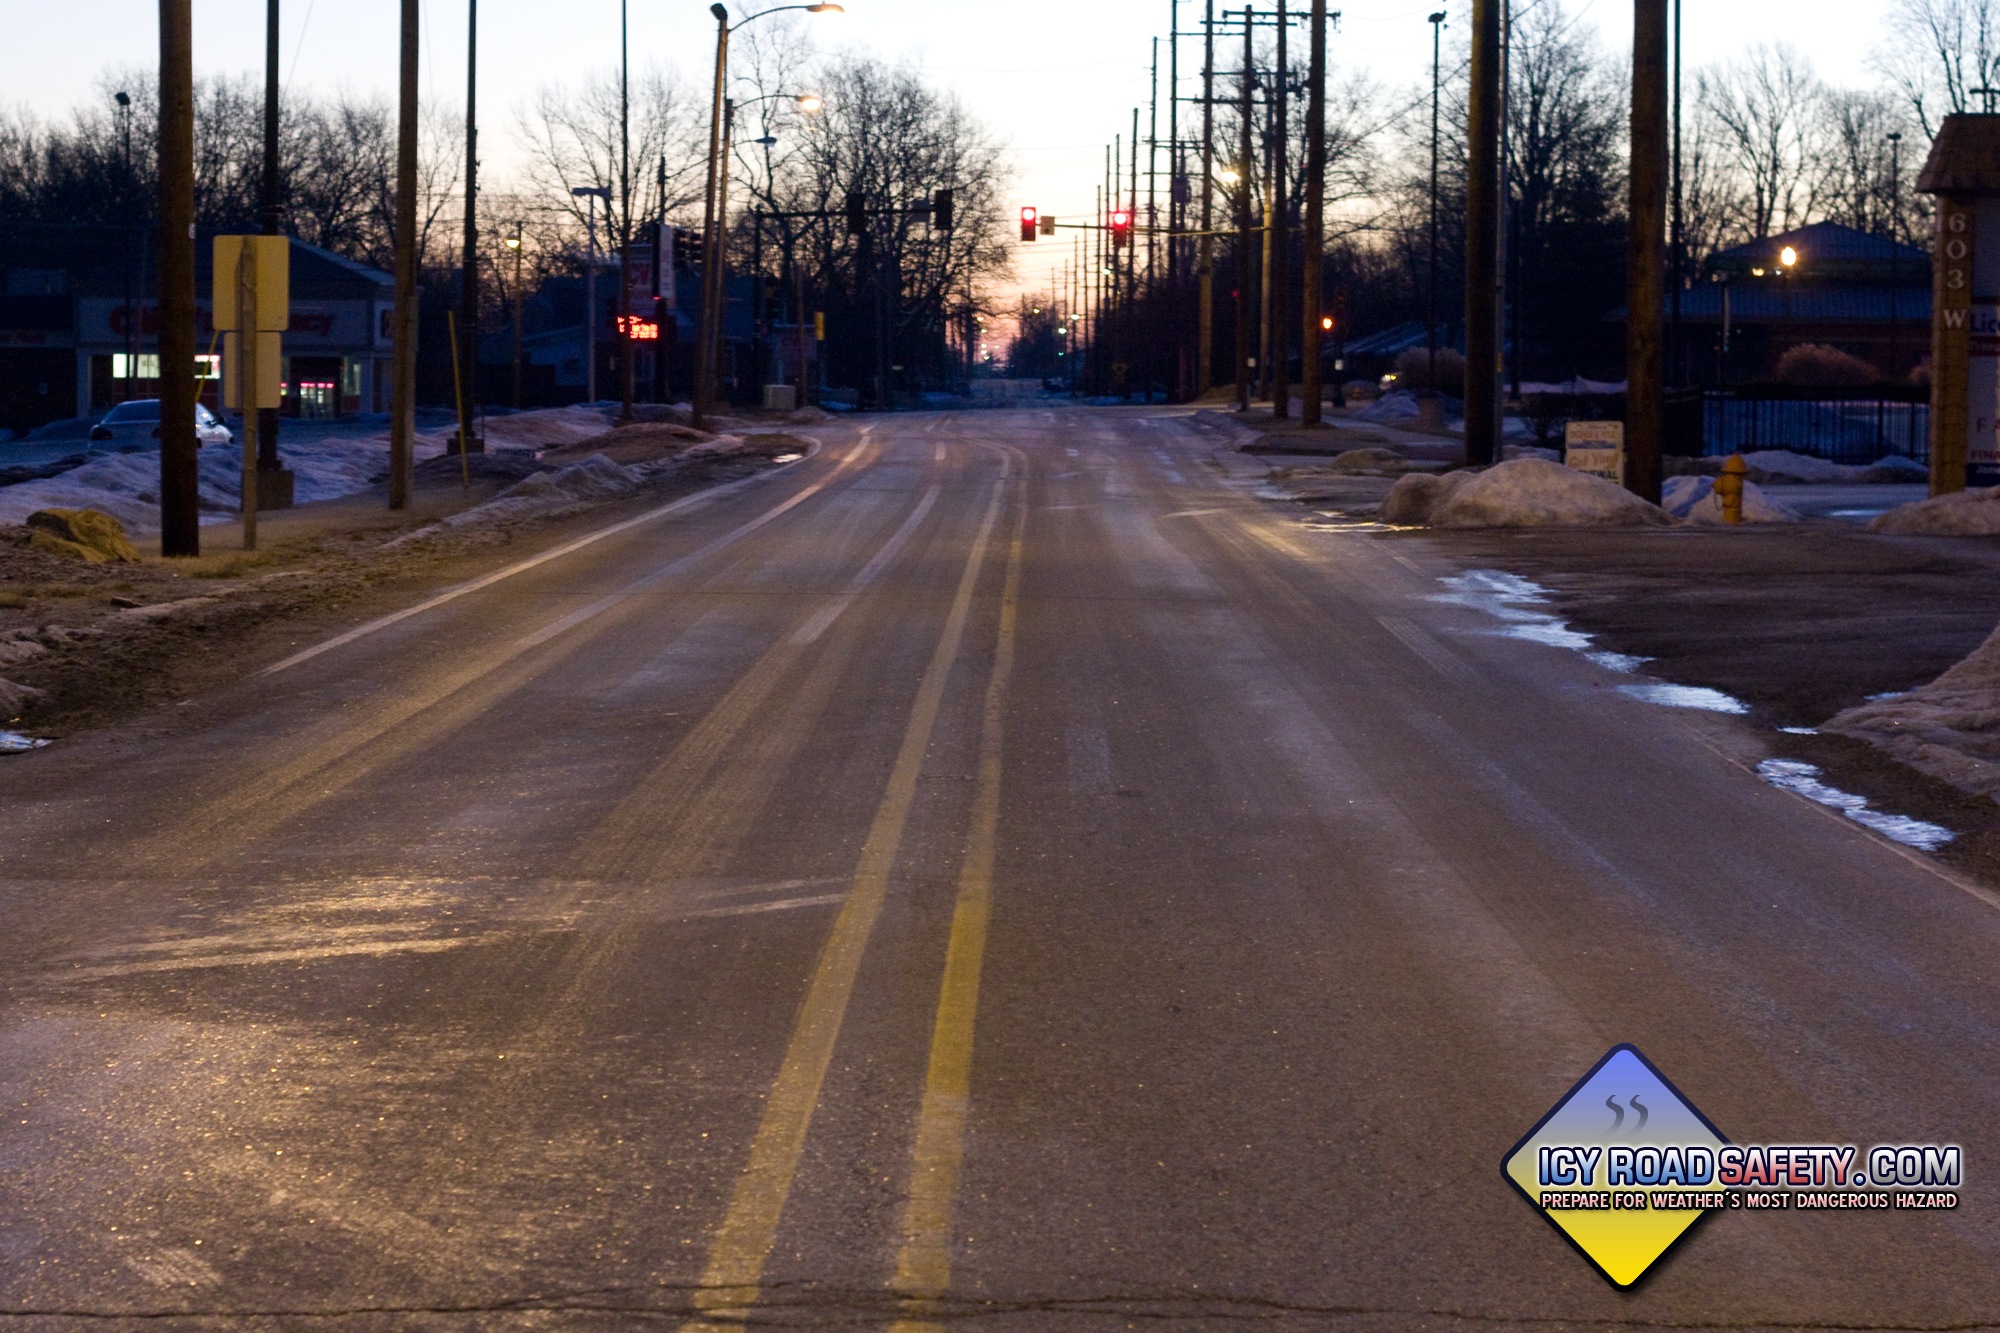 Icy roads due to frost in Alton, IL - January 12, 2014